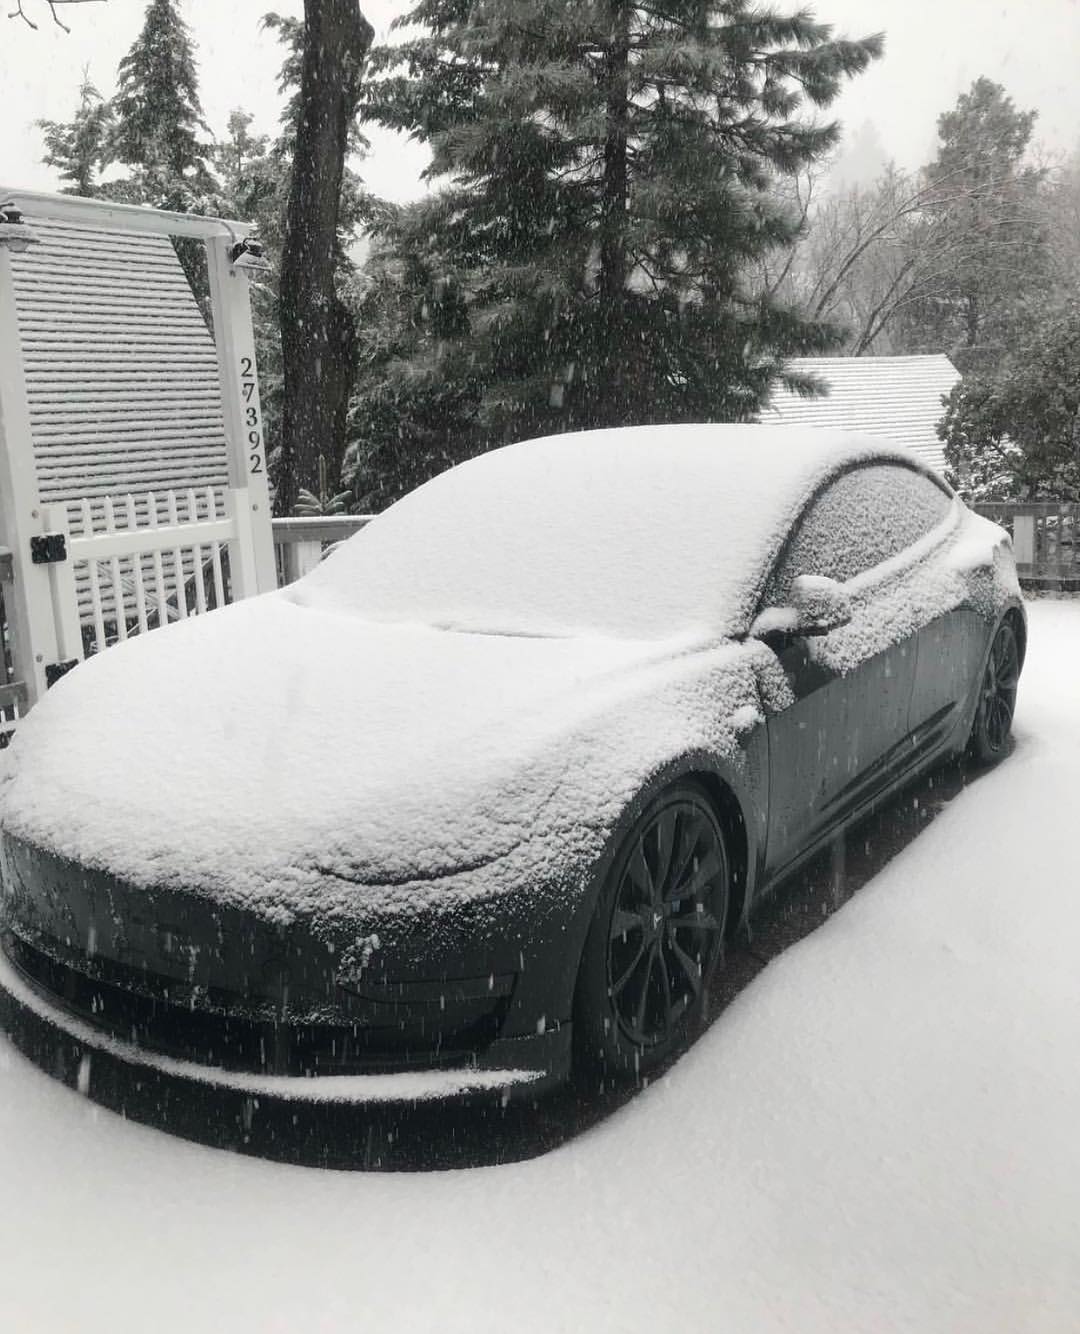 A Tesla Model 3 totally covered in snow